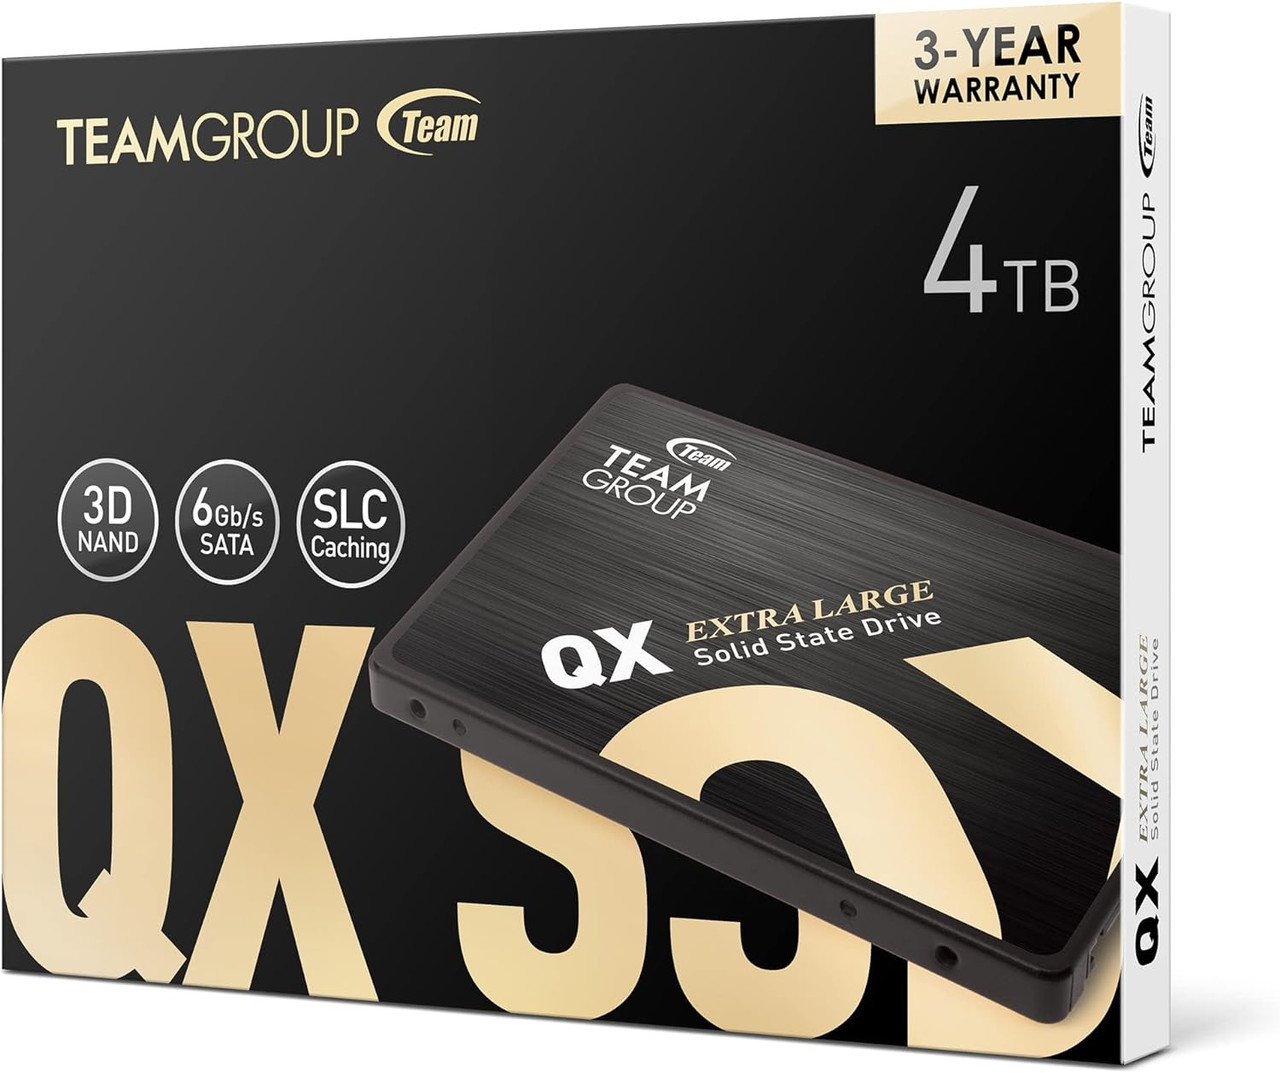 TEAMGROUP QX 4TB 3D NAND QLC 2.5 Inch SATA III Internal Solid State Drive SSD up to 560 MB/s T253X7004T0C101